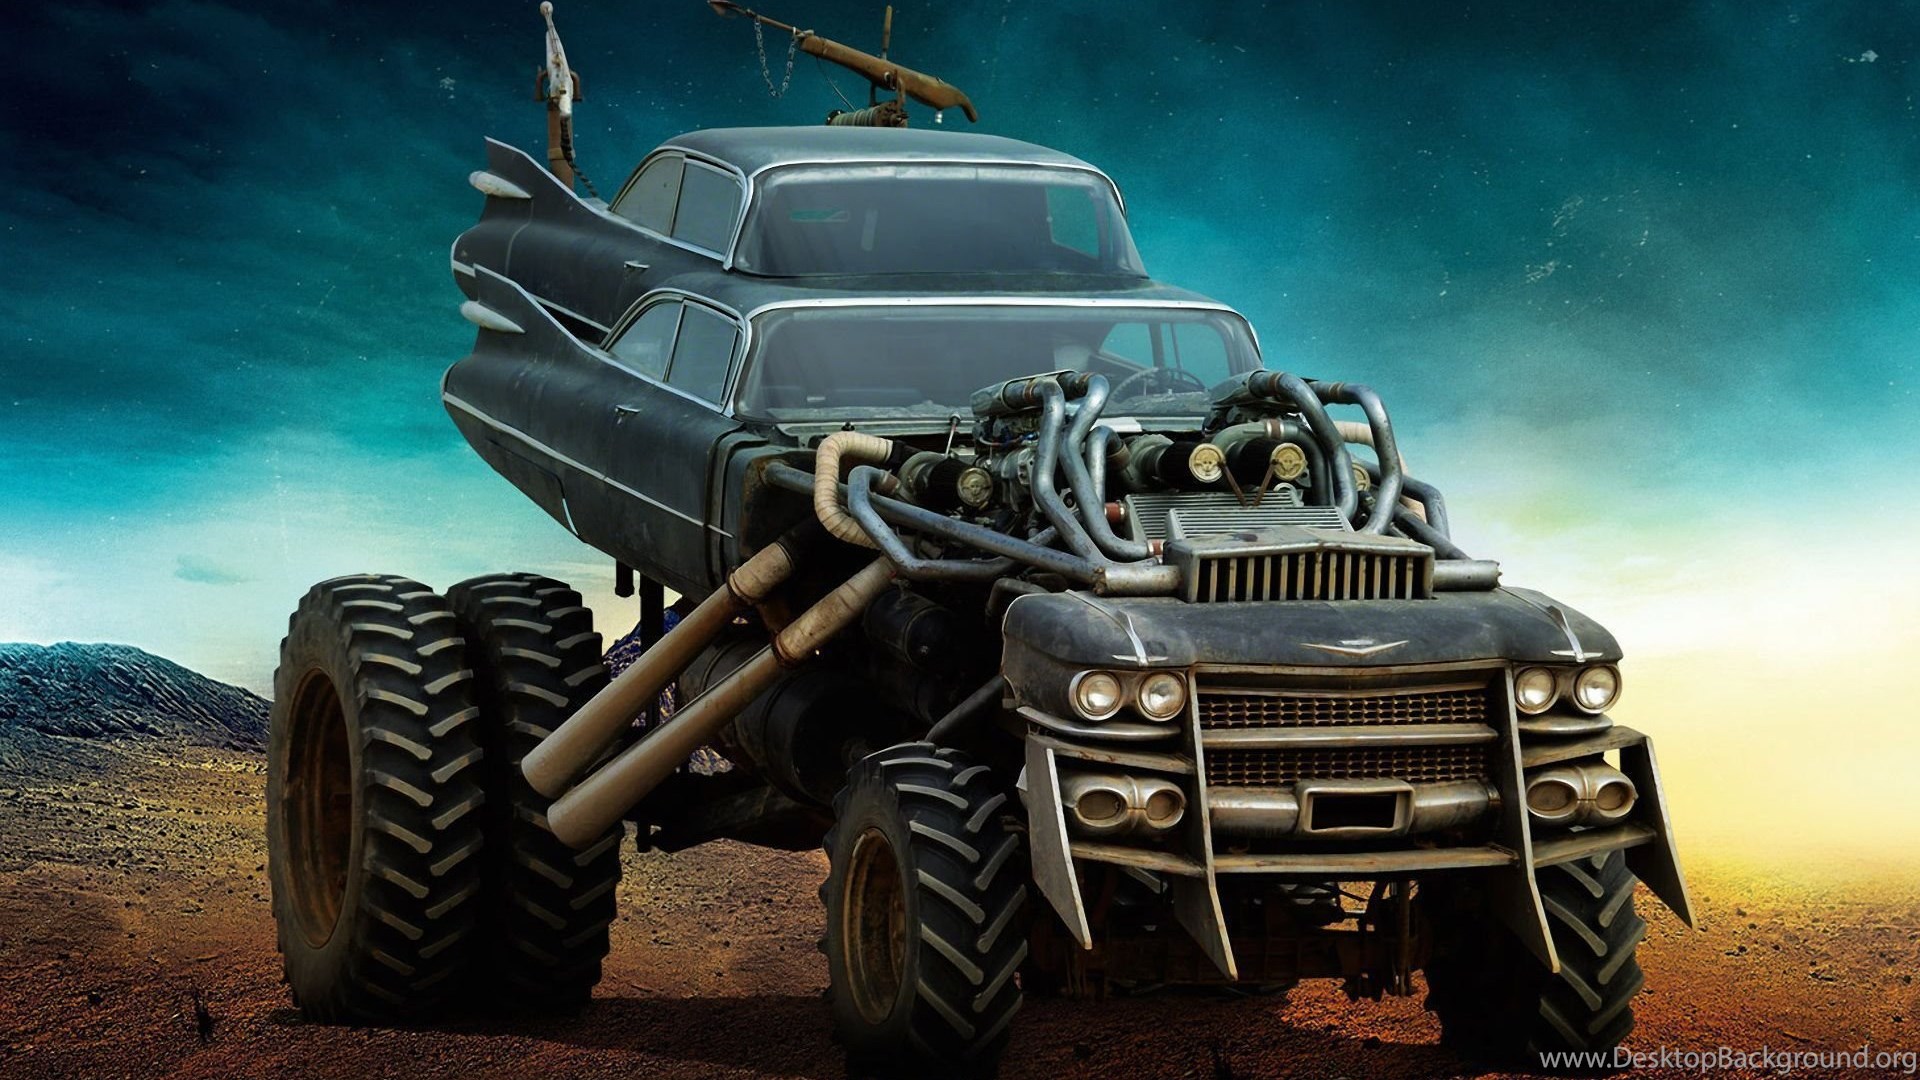 The Gigahorse From Mad Max Fury Road Wallpaper Jpg Desktop Background